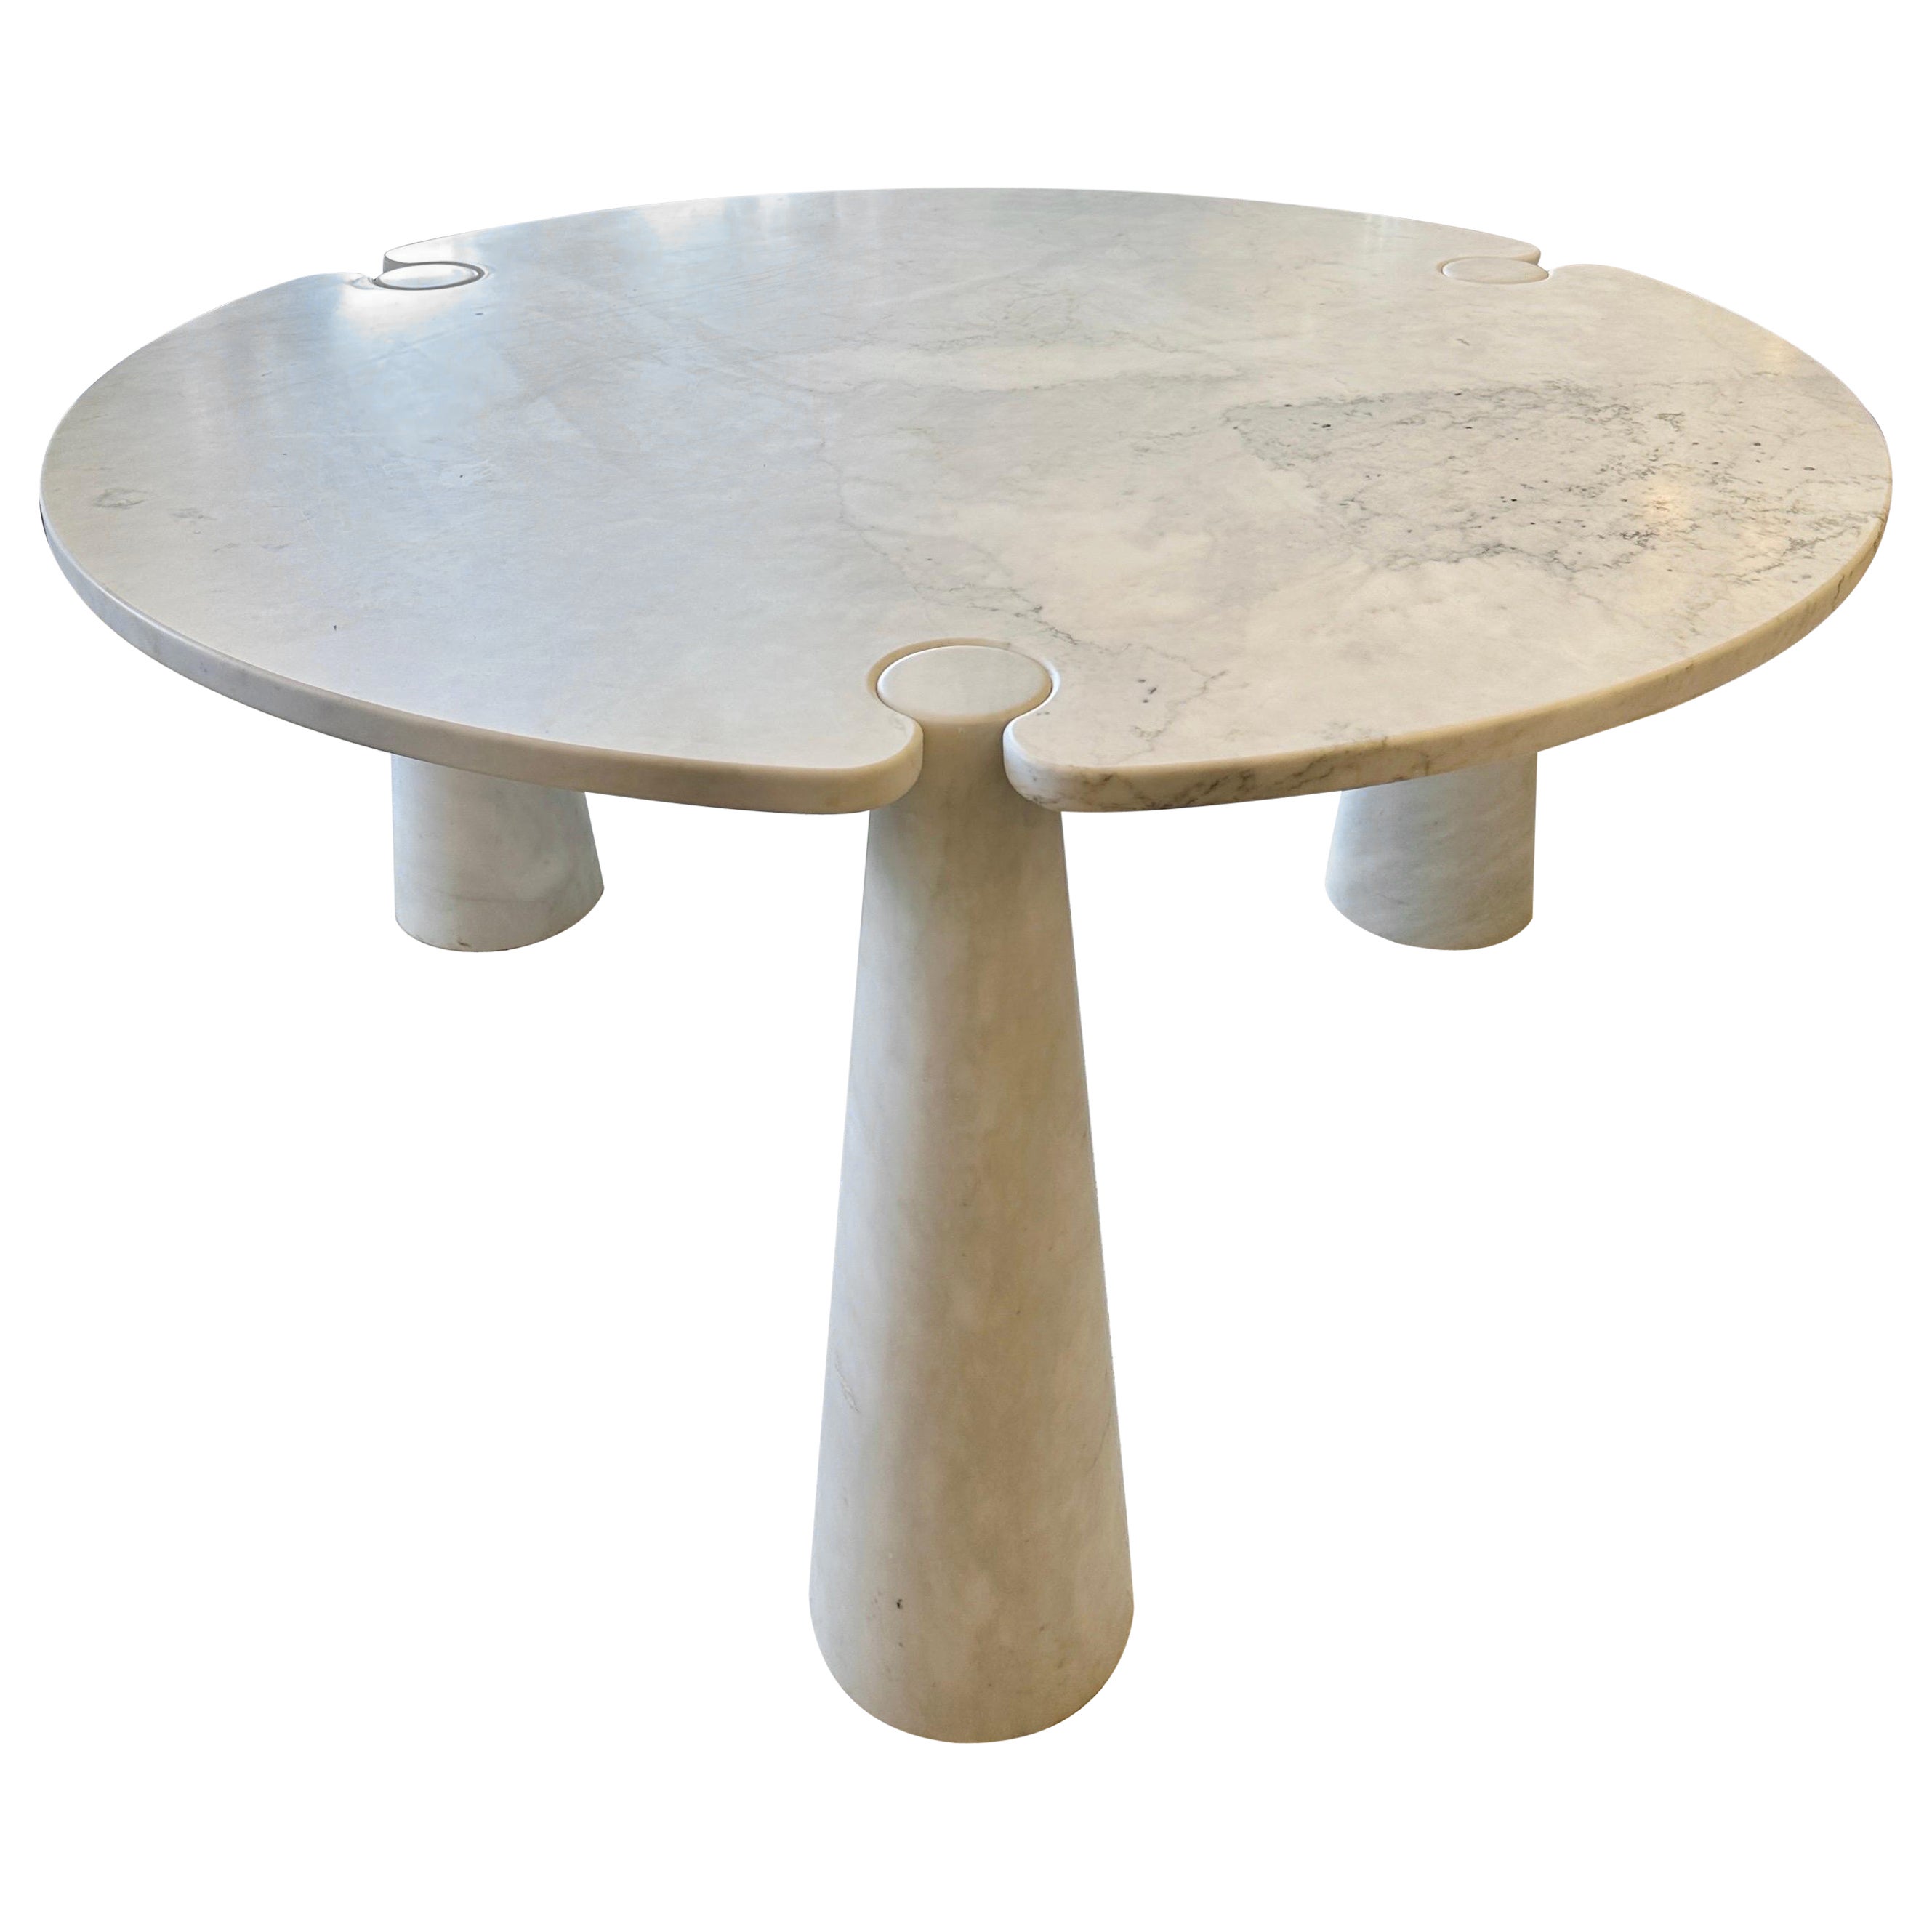 Angelo Mangiarotti 'Eros' Round Marble Dining Table, Italy, 1970s For Sale